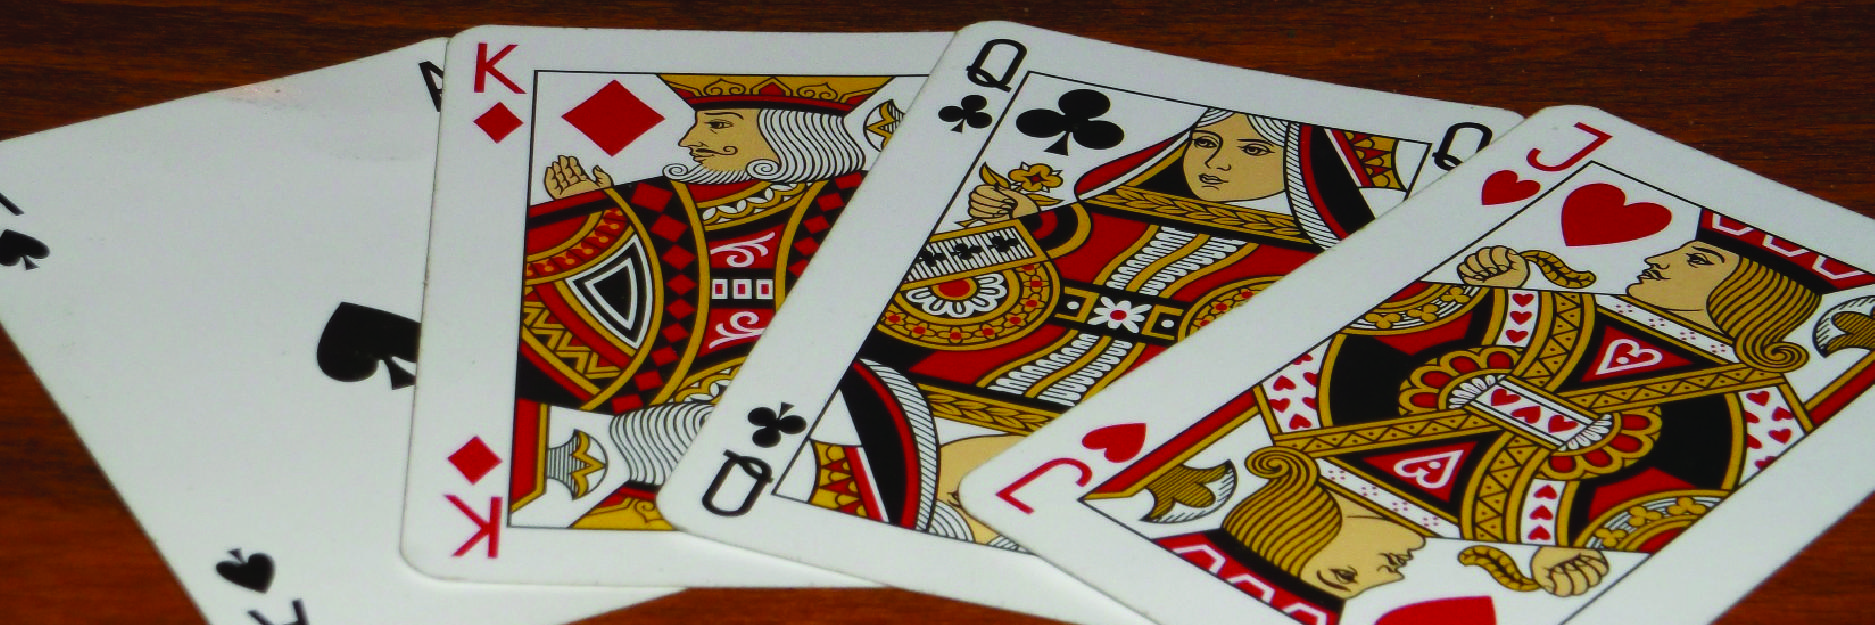 Four poker-sized playing cards fanned out on a table.